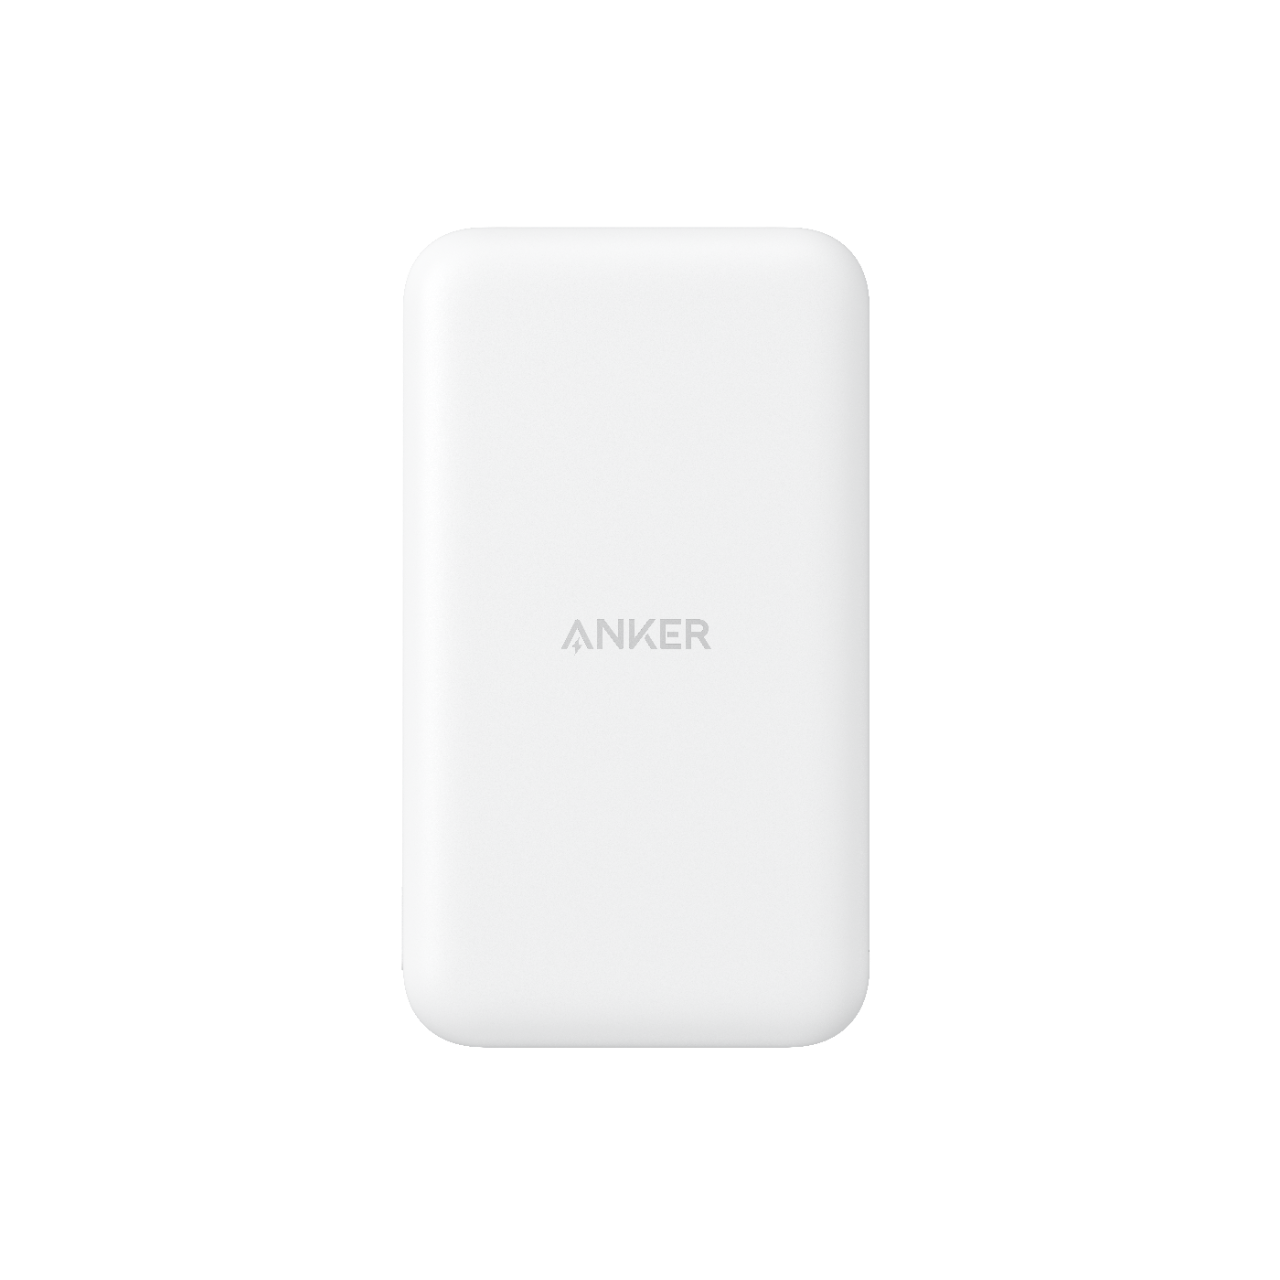 Anker Qi2 15W MagSafe Charger Review - GadgetMates